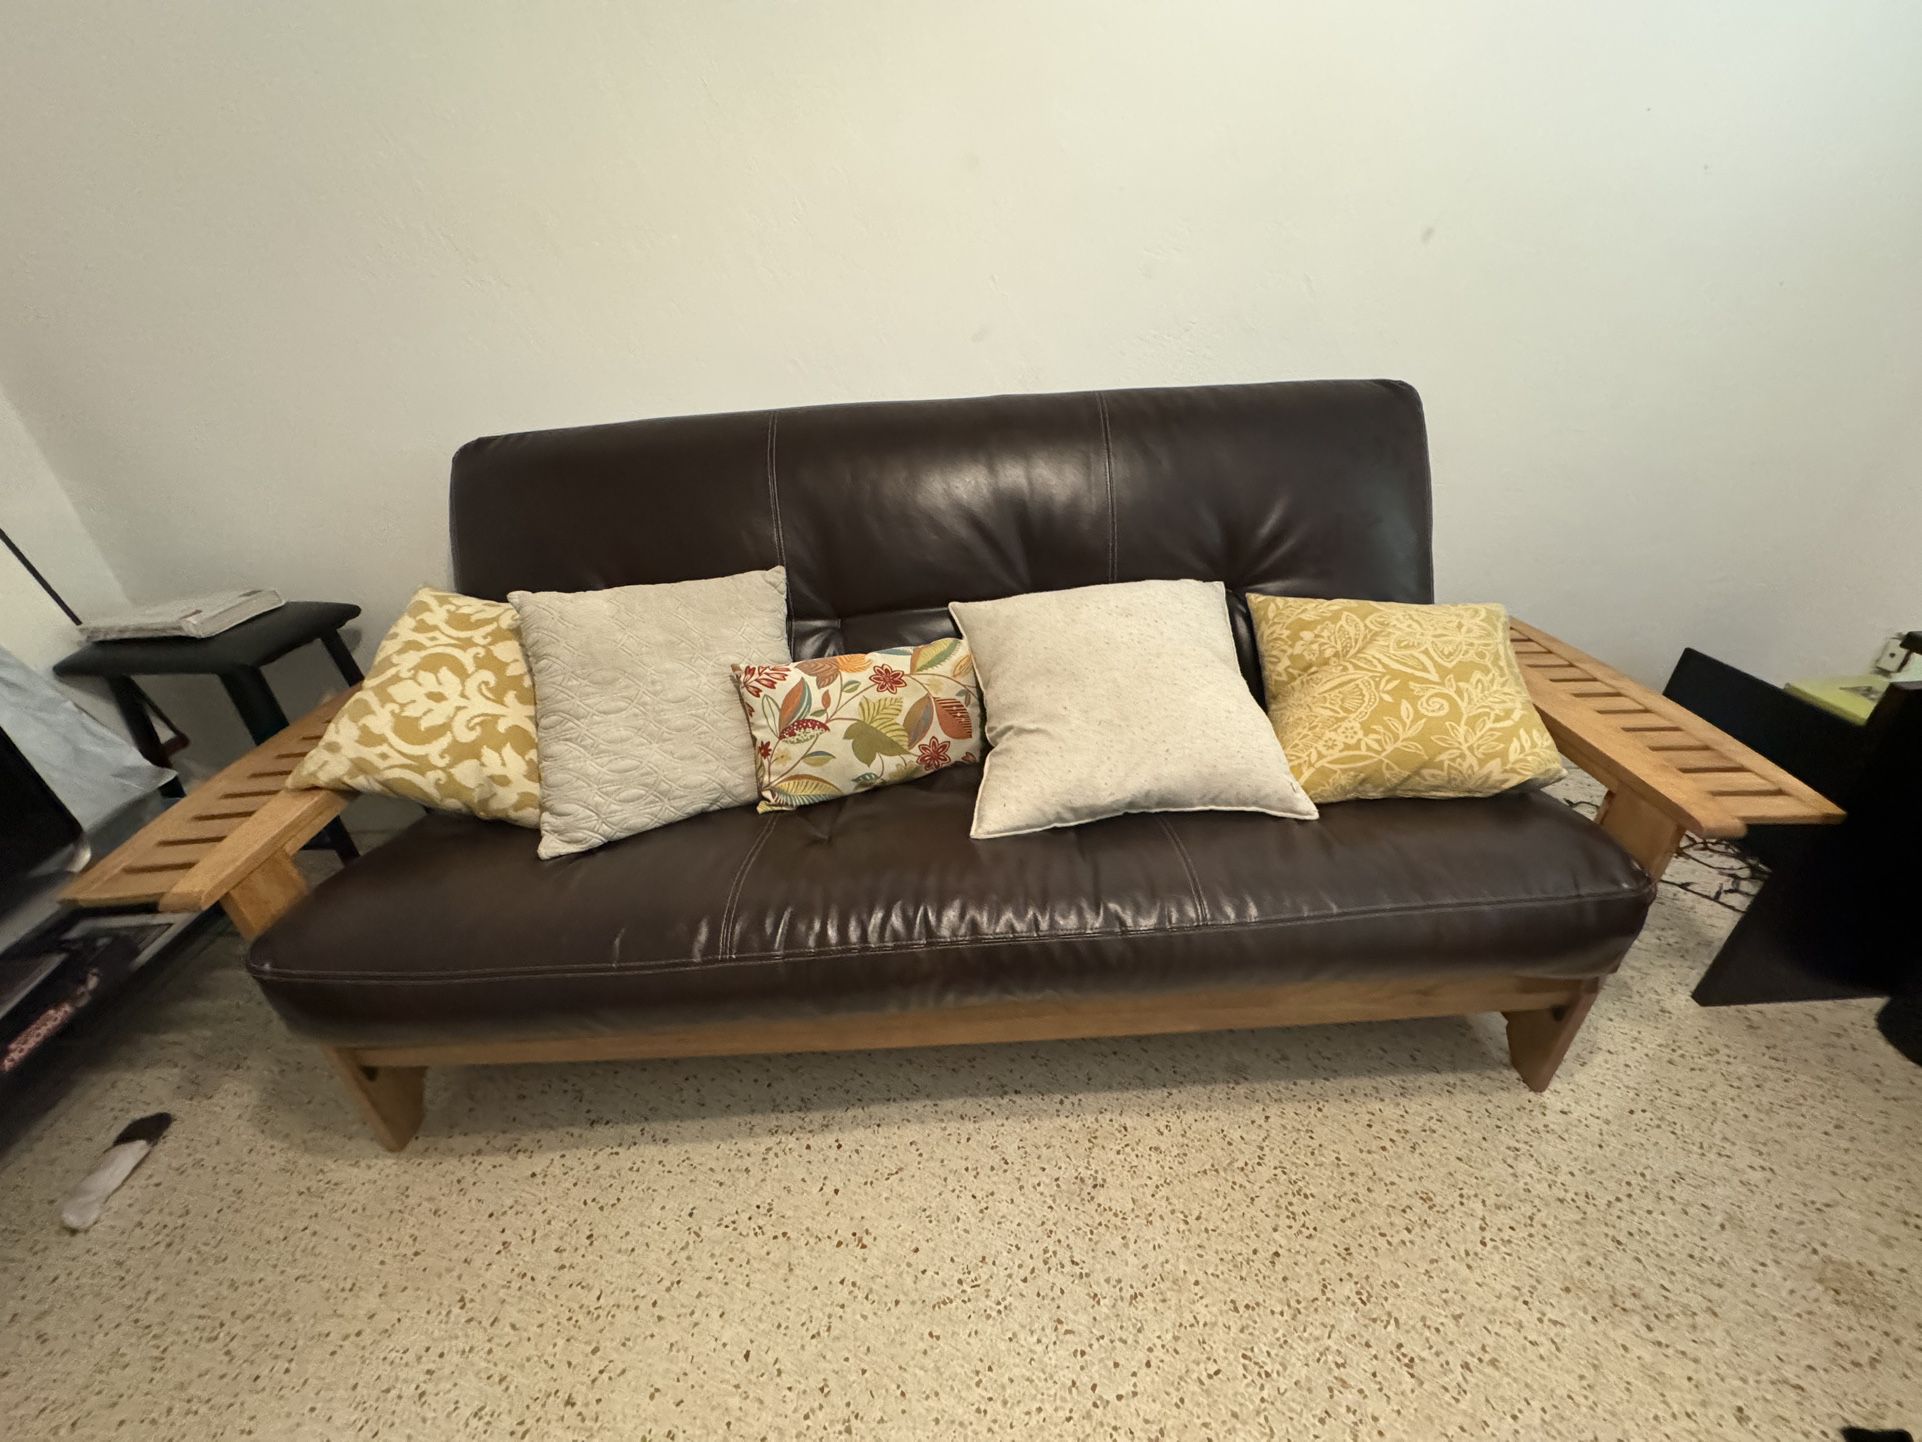 Gorgeous Wood And Brown Leather Pull Out Futon 